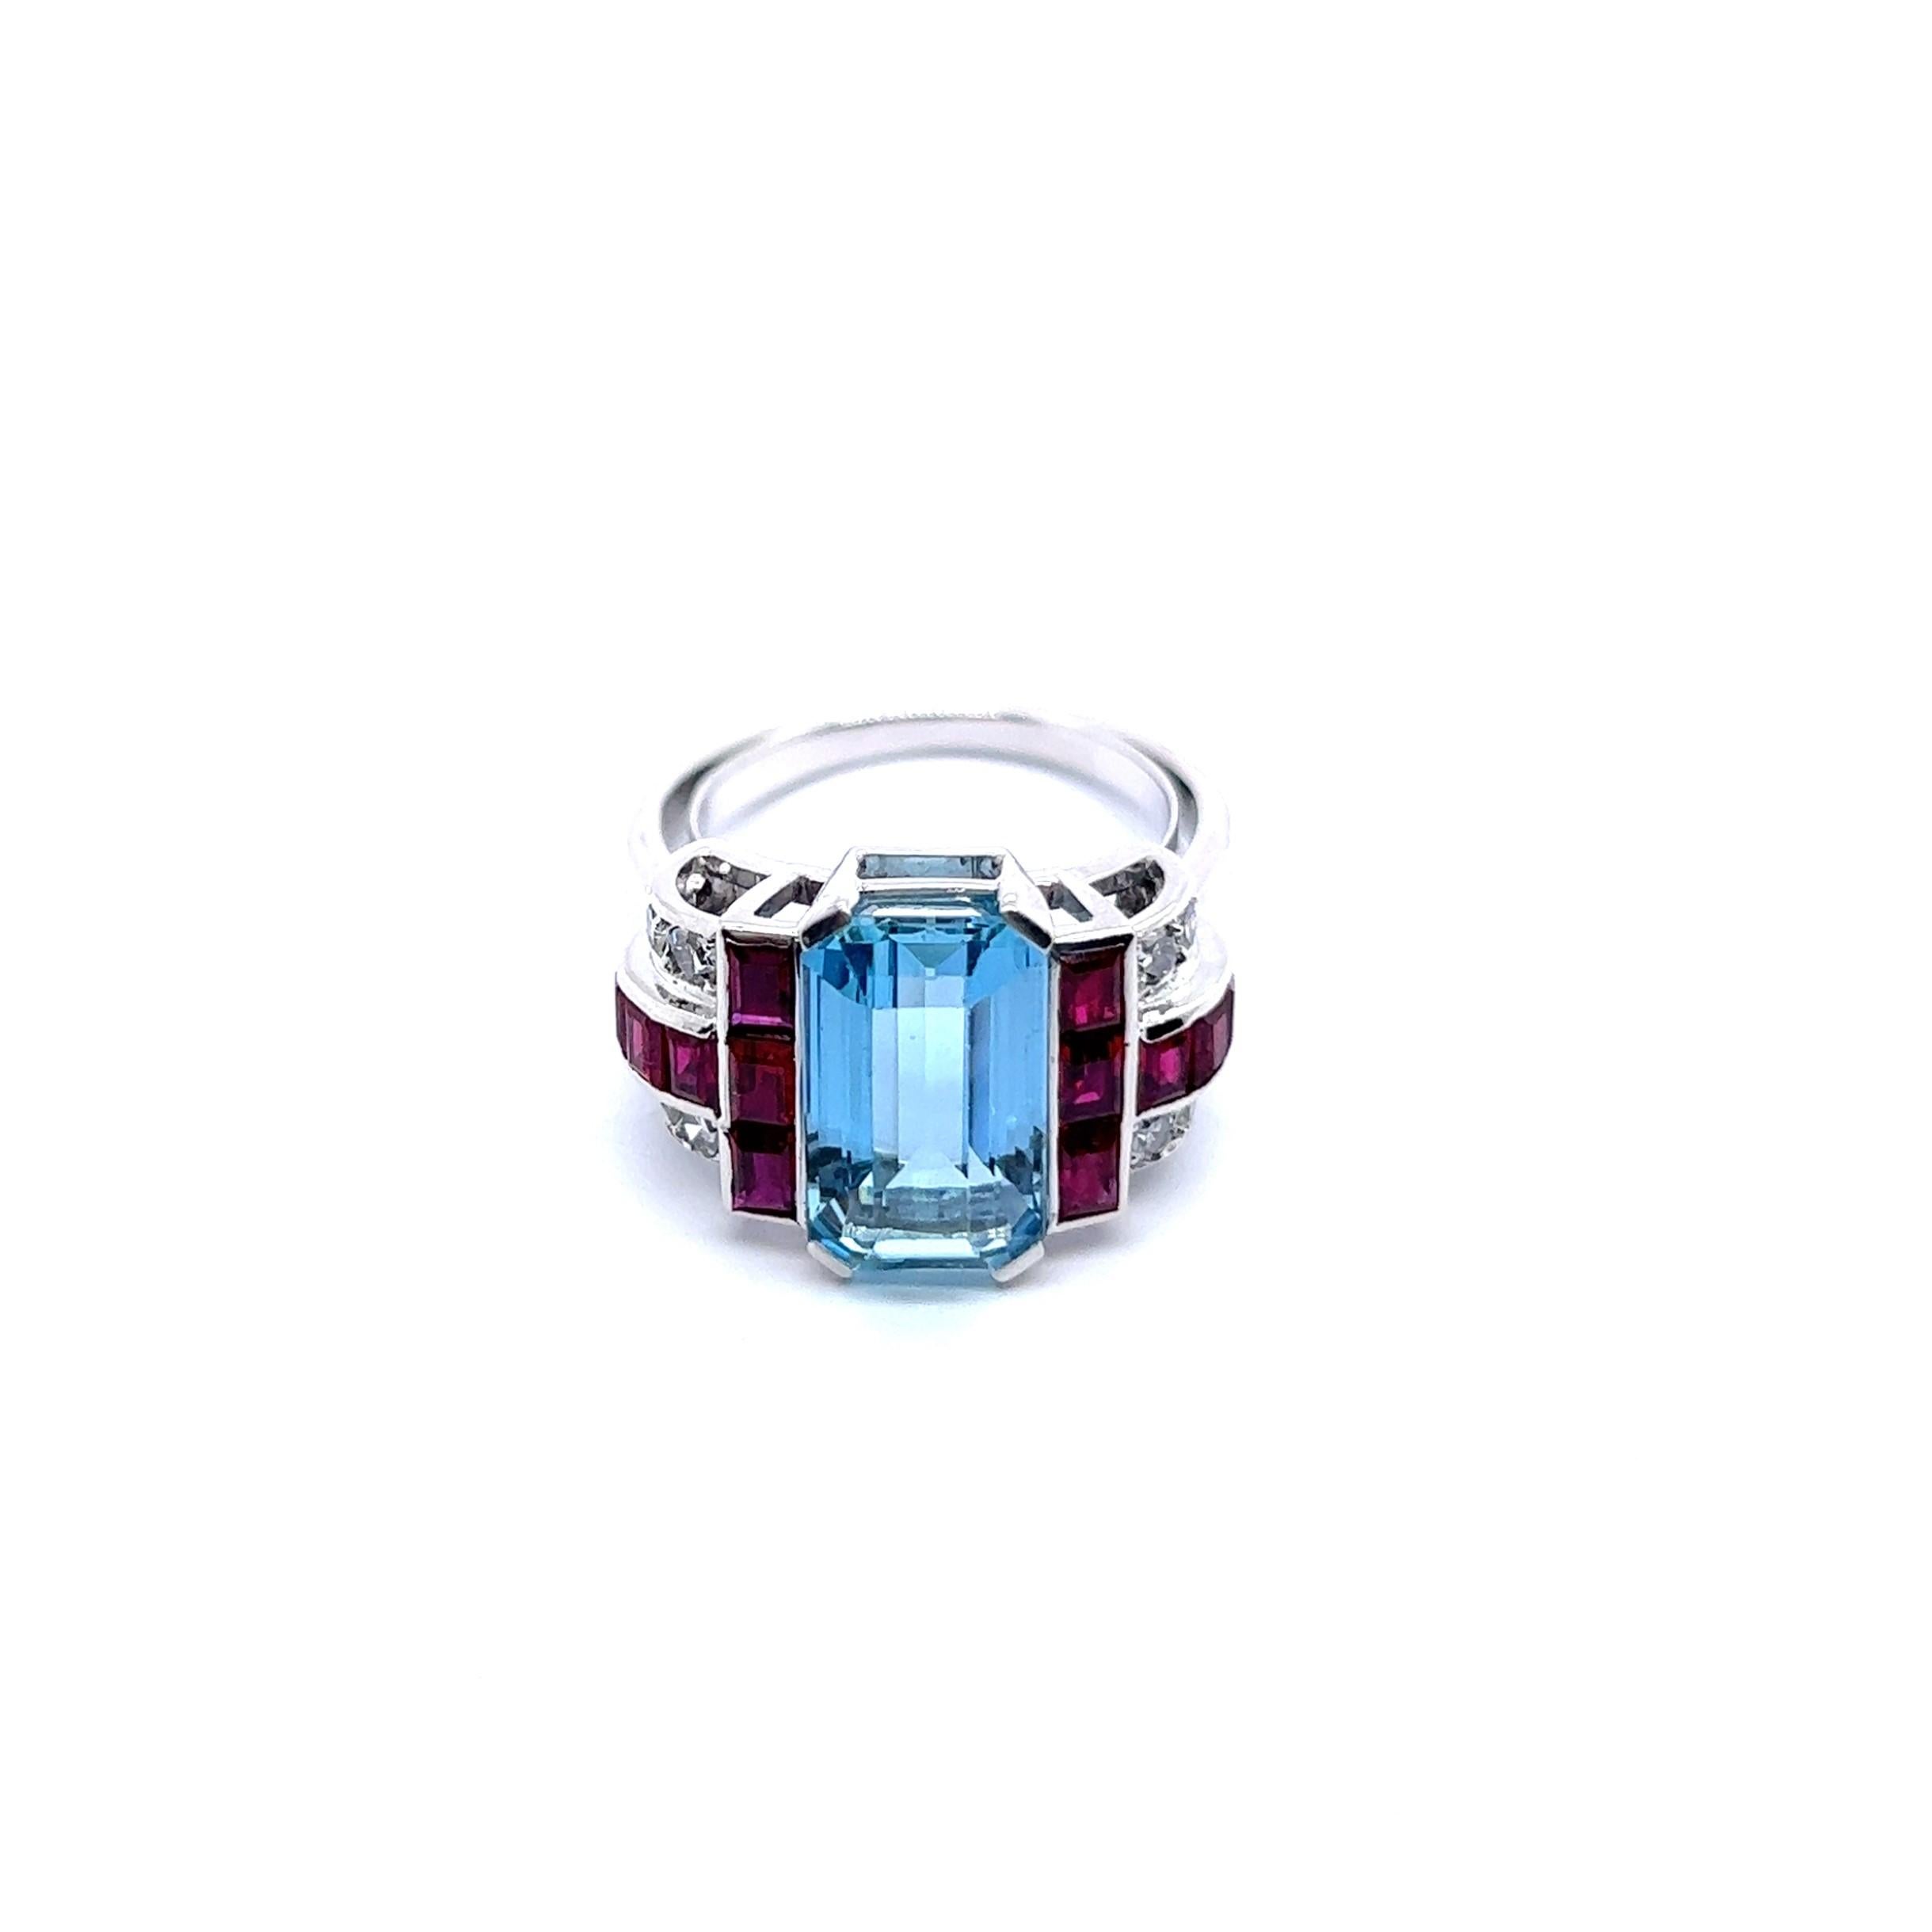 Presenting an exceptional Art Deco-style ring in 18 Karat white gold, adorned with a unique combination of aquamarine, rubies, and diamonds.

This exquisite creation is the work of Gübelin, a renowned Swiss jeweler with a remarkable legacy spanning